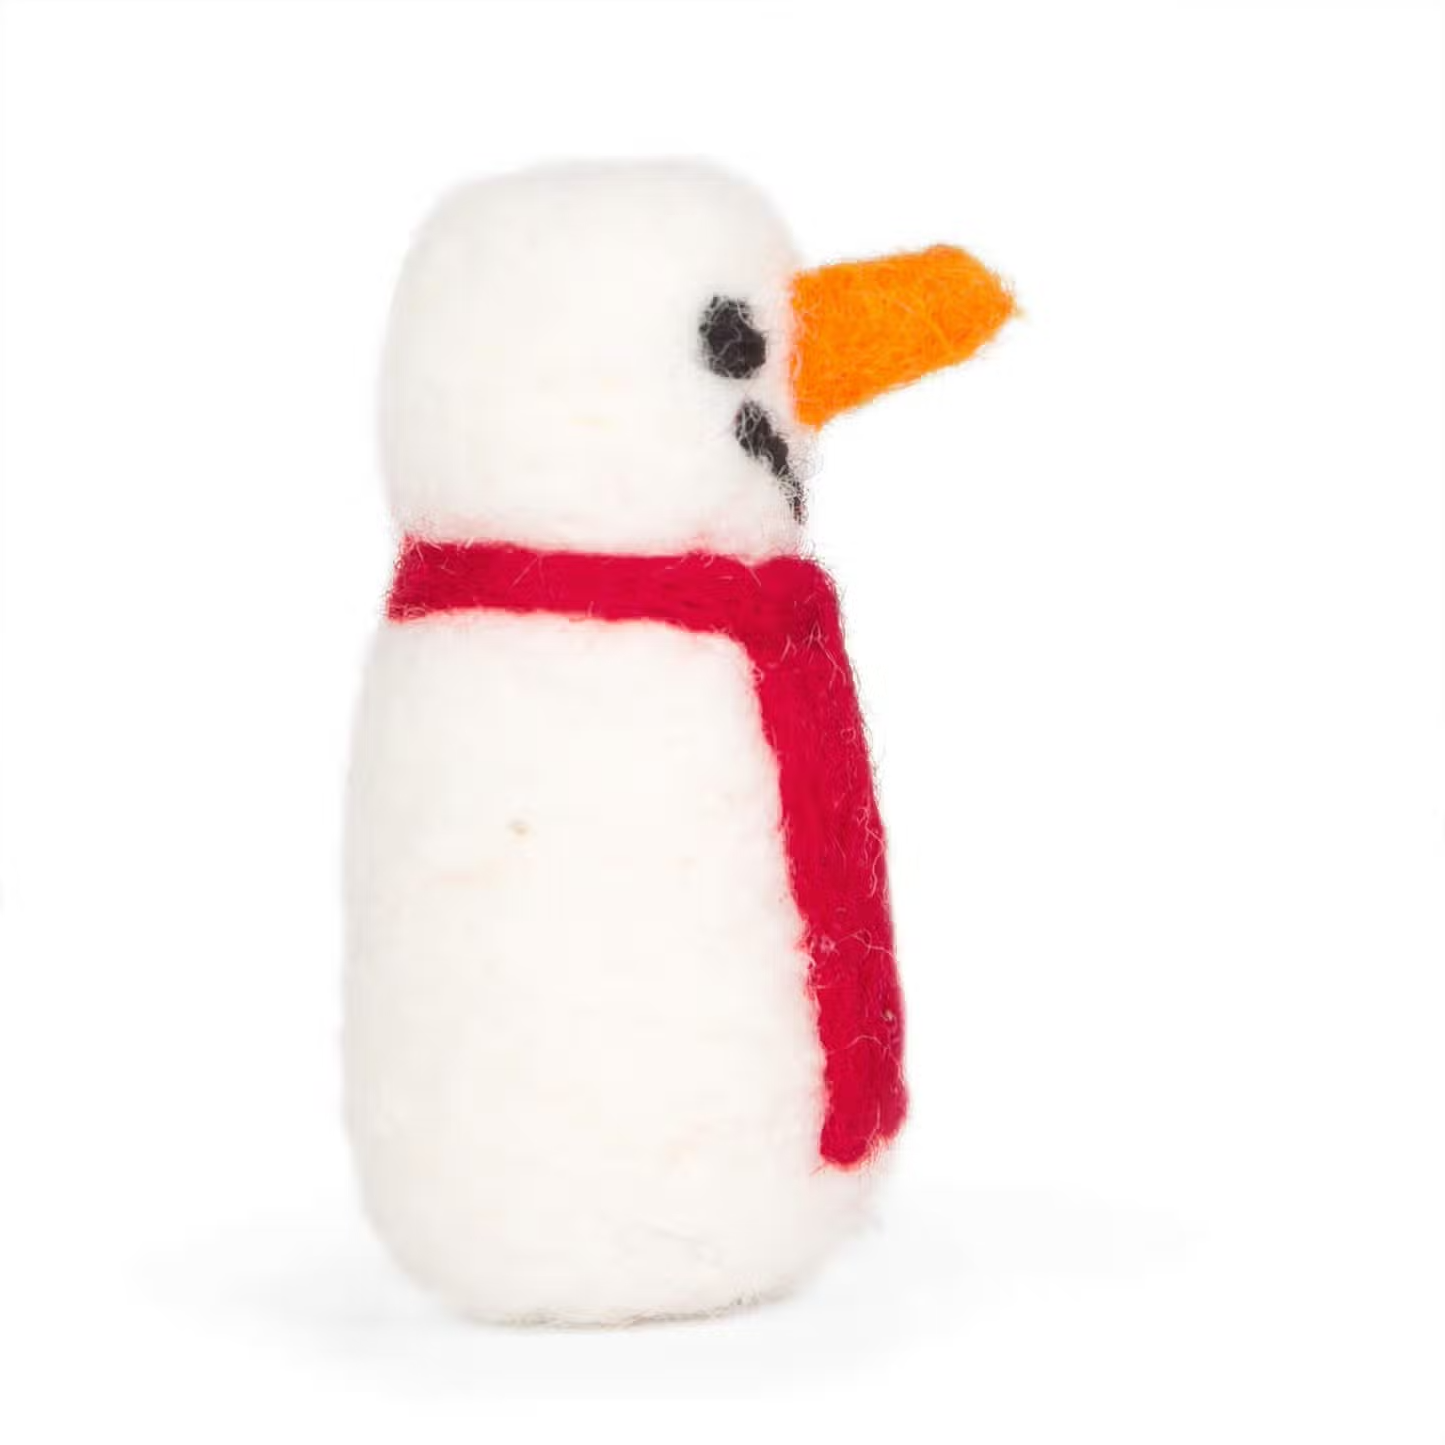 Side view of Snowman with red scarf.